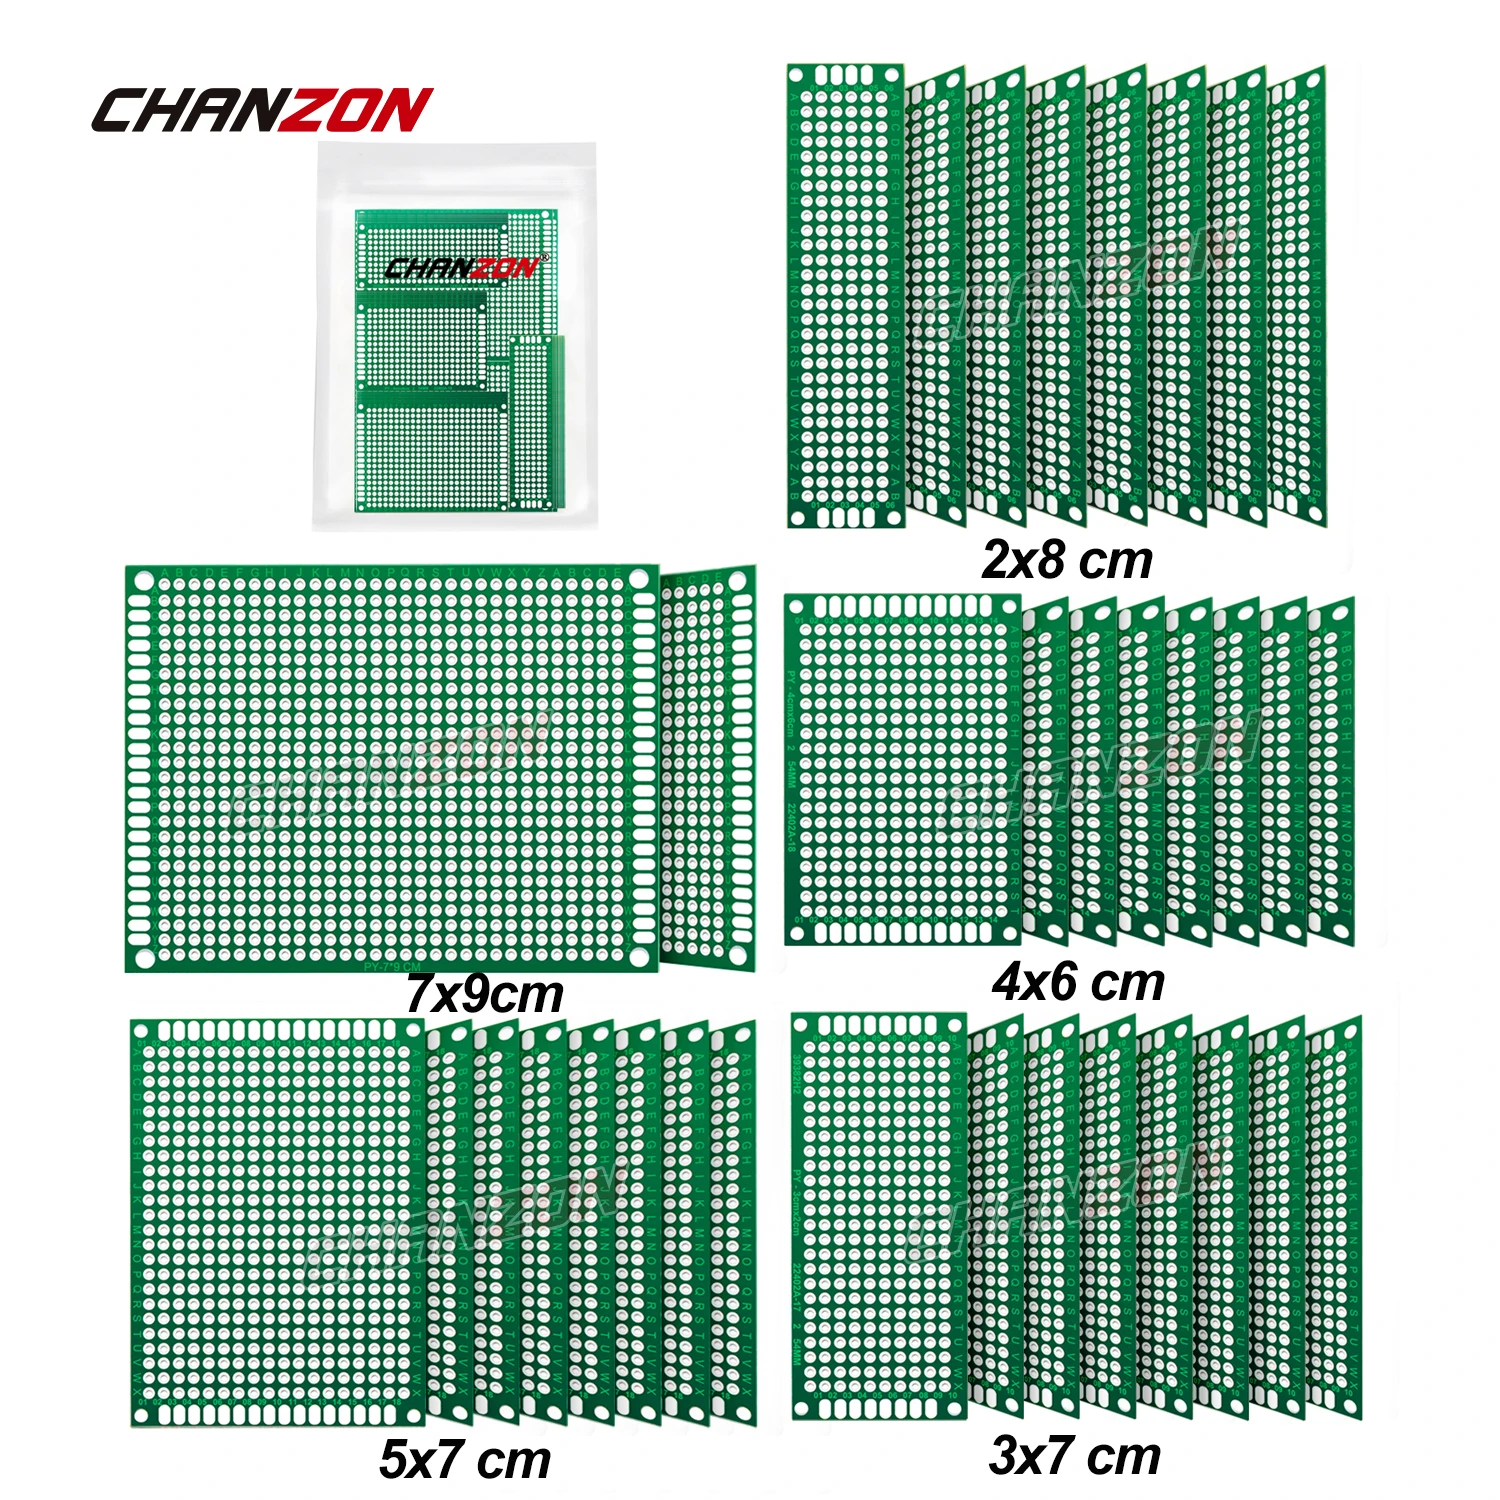 34 Pcs Double Sided PCB Board Tinned ( 2X8 3X7 4X6 5X7 7x9 cm ) Prototype Kit FR4 Printed Universal Circuit Perfboard for DIY